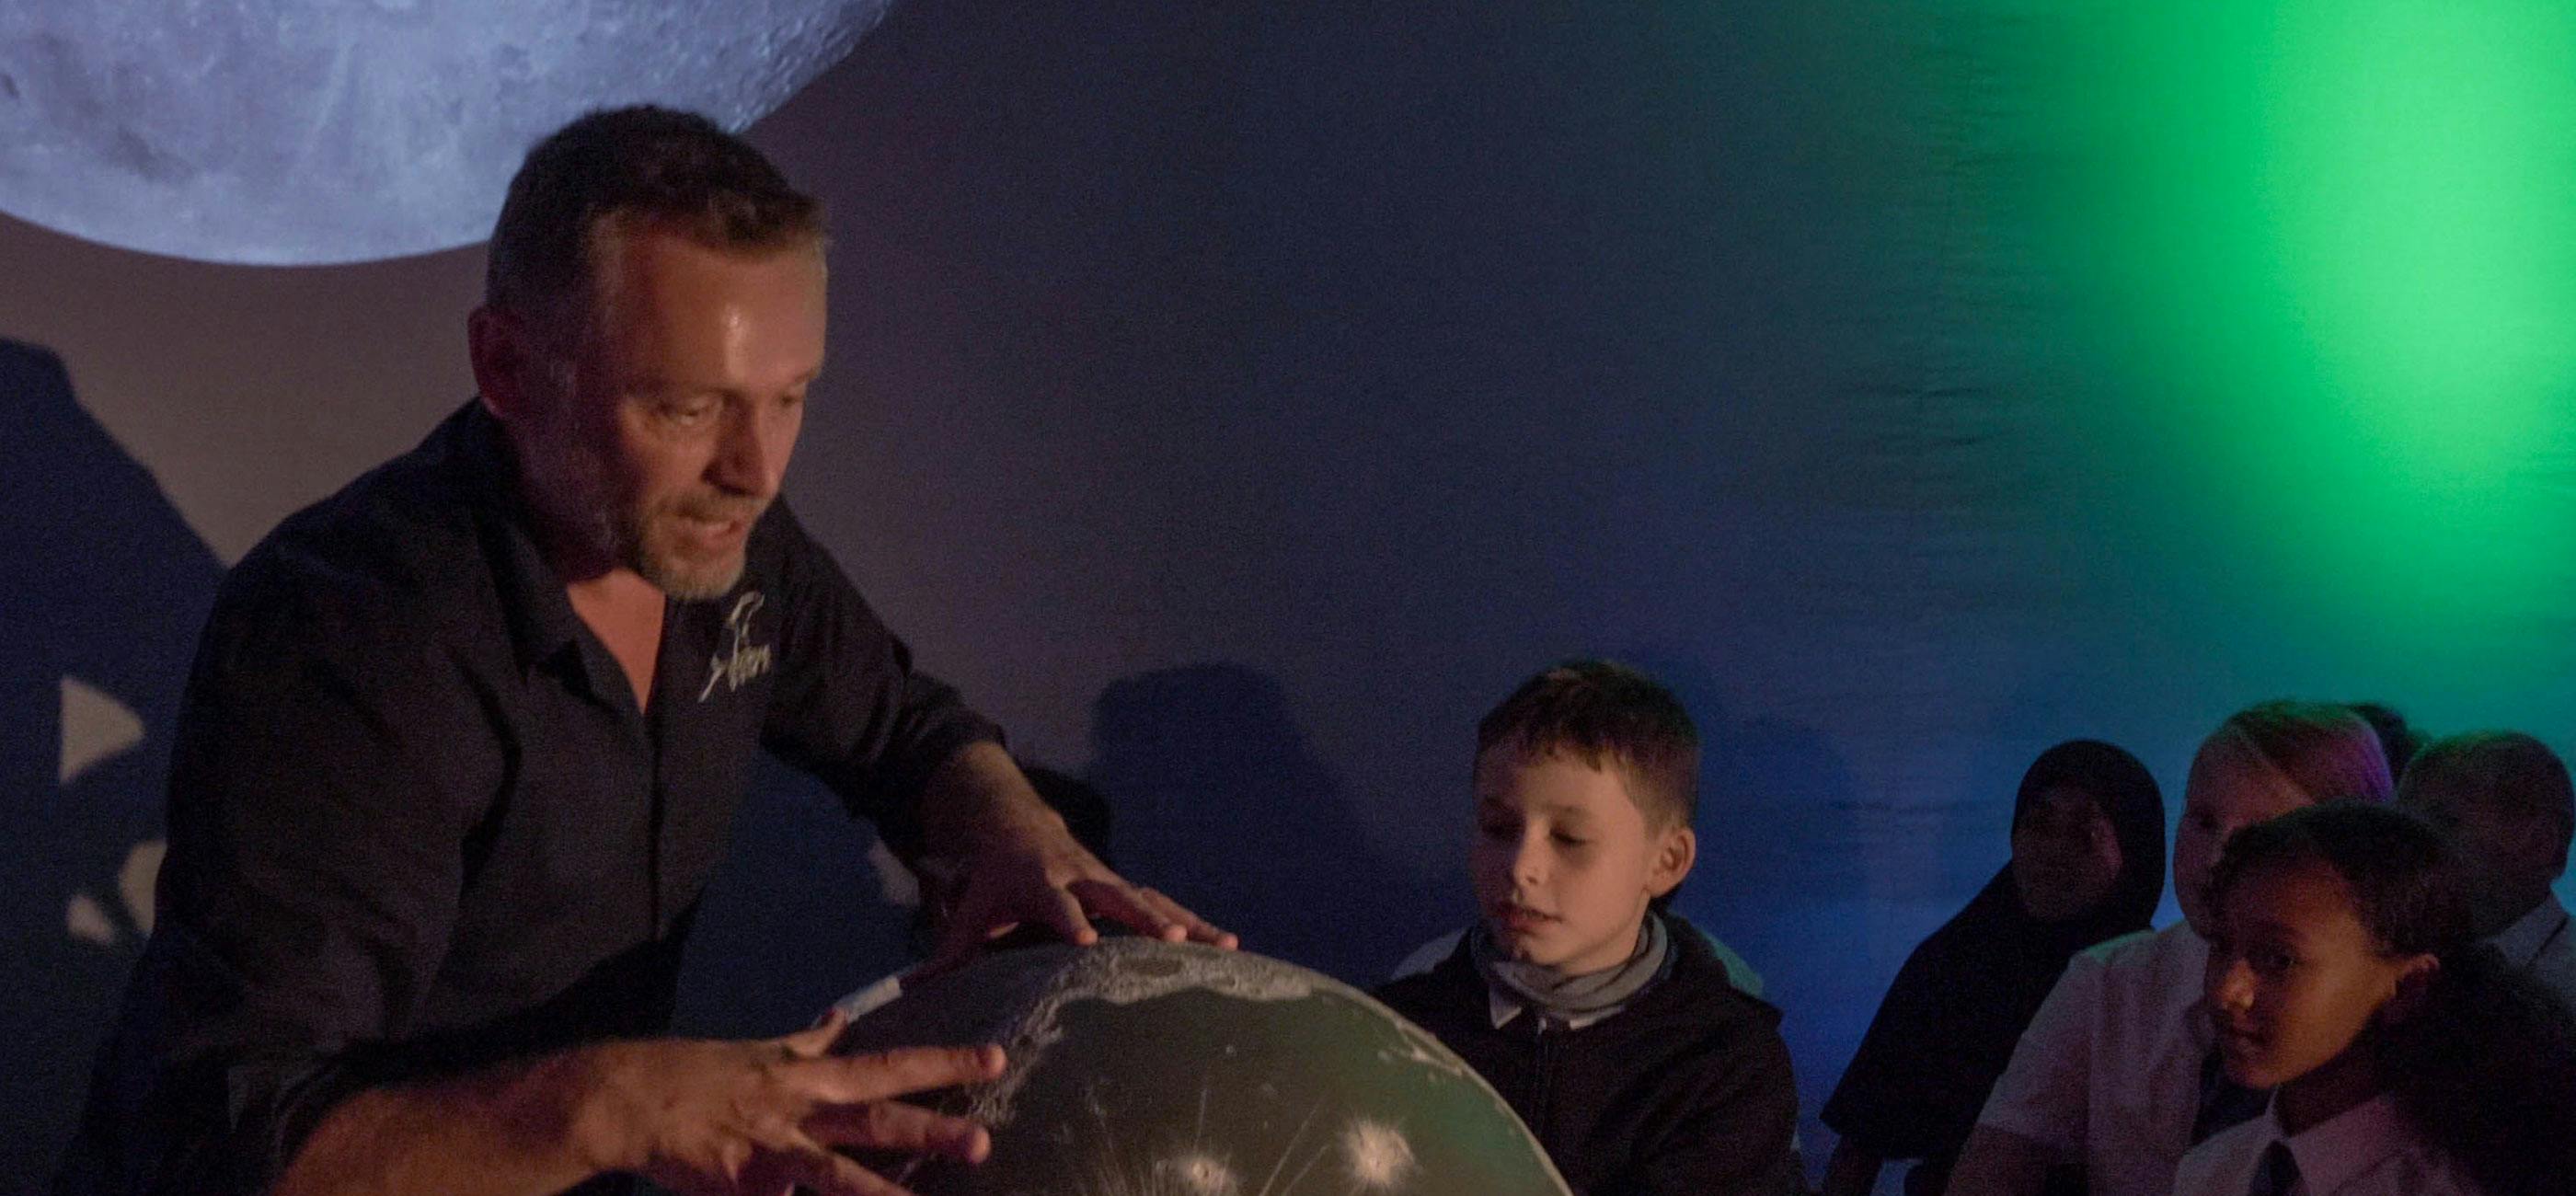 Inside the Explorer Dome, with a man with hands on a model moon, with the moon projected onto the inside of the dome, with children watching